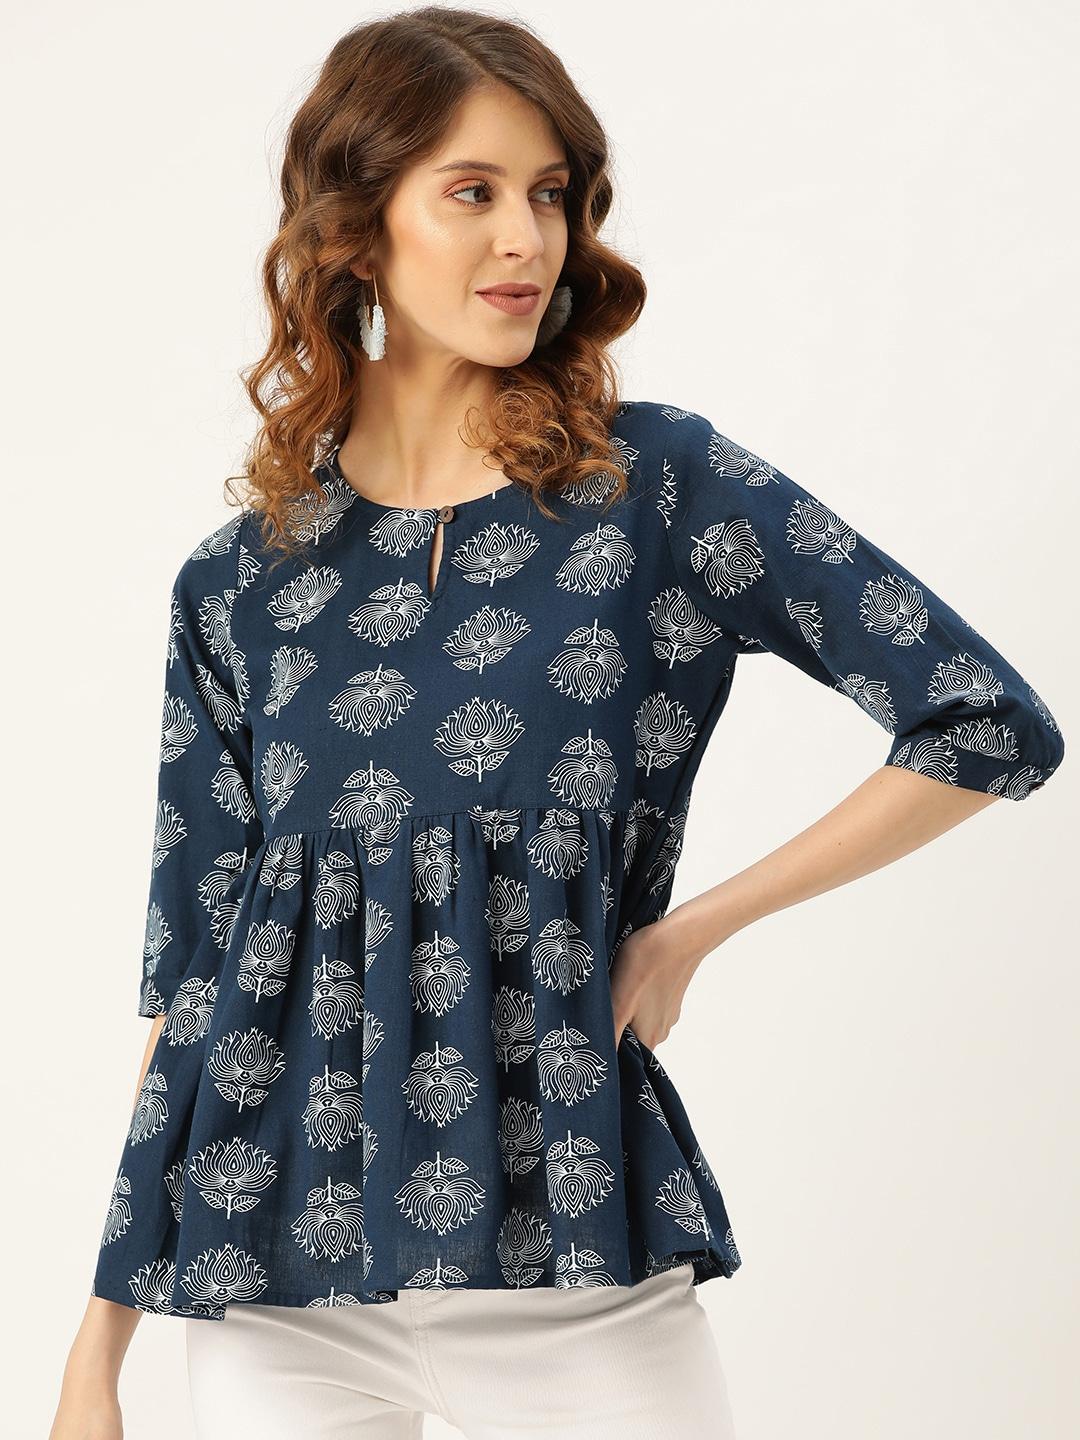 Shae by SASSAFRAS Women Navy Blue & White Lotus Printed A-Line Pure Cotton Top